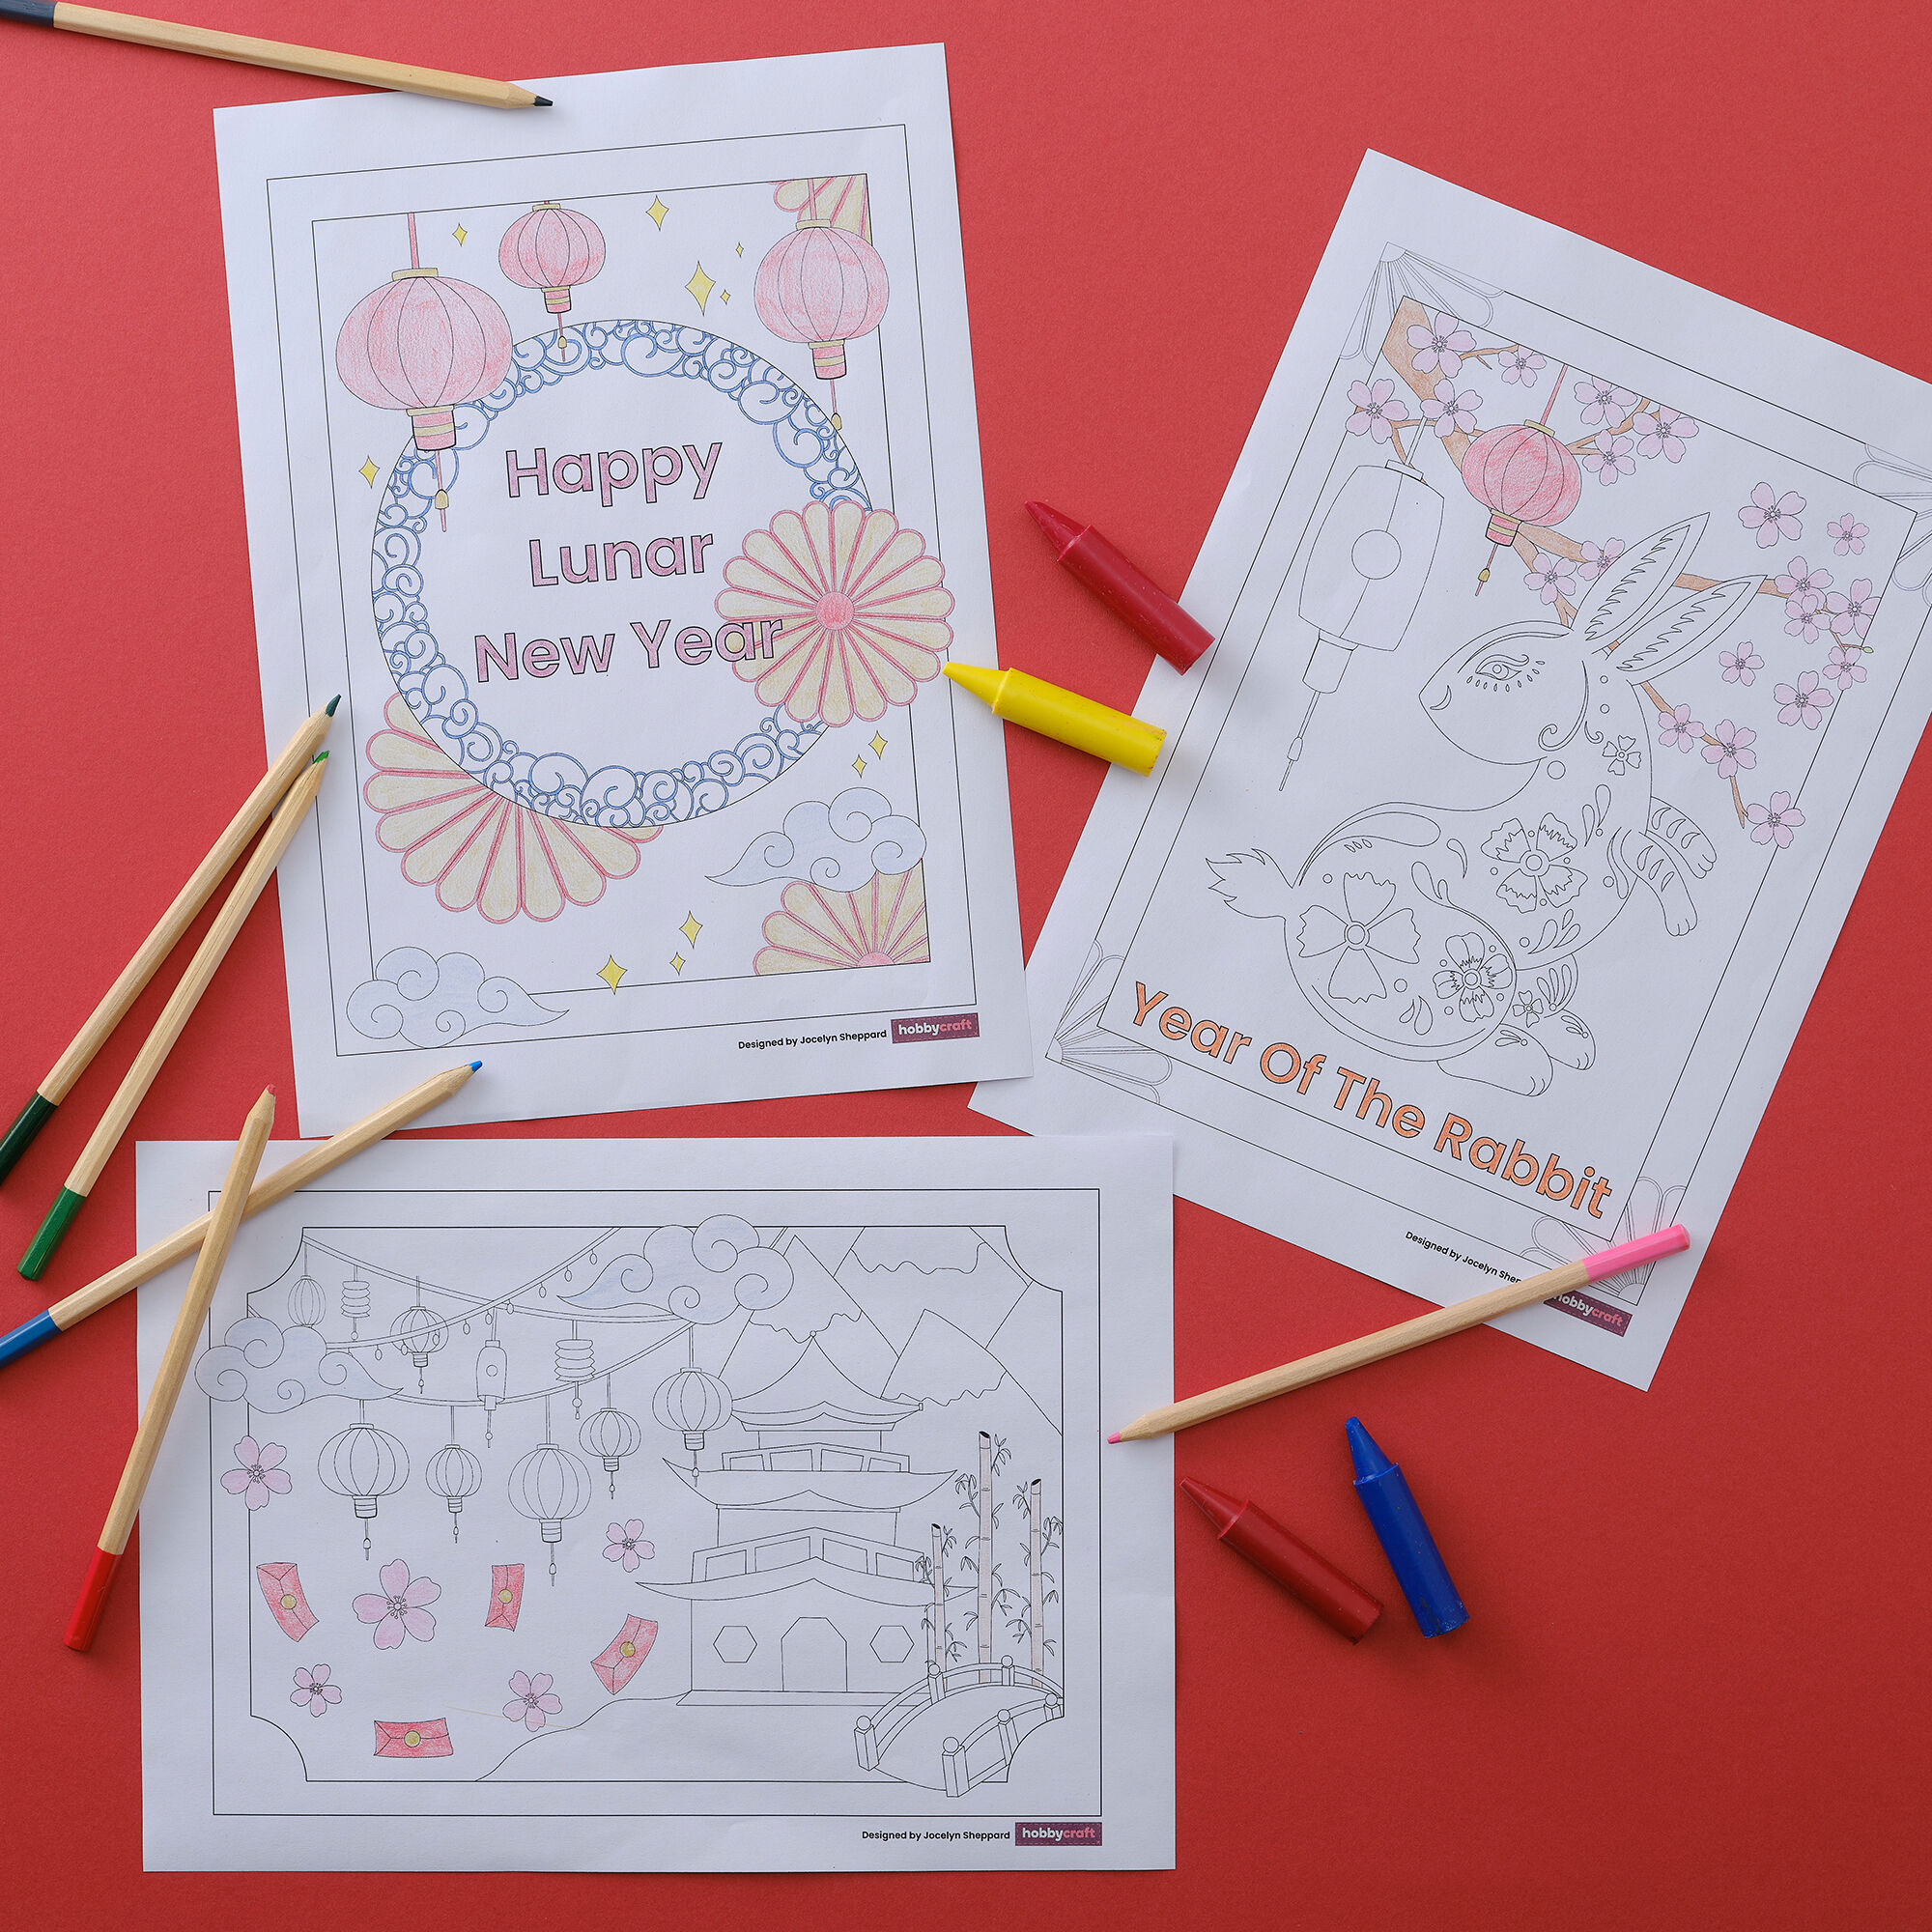 Free Lunar New Year Worksheets